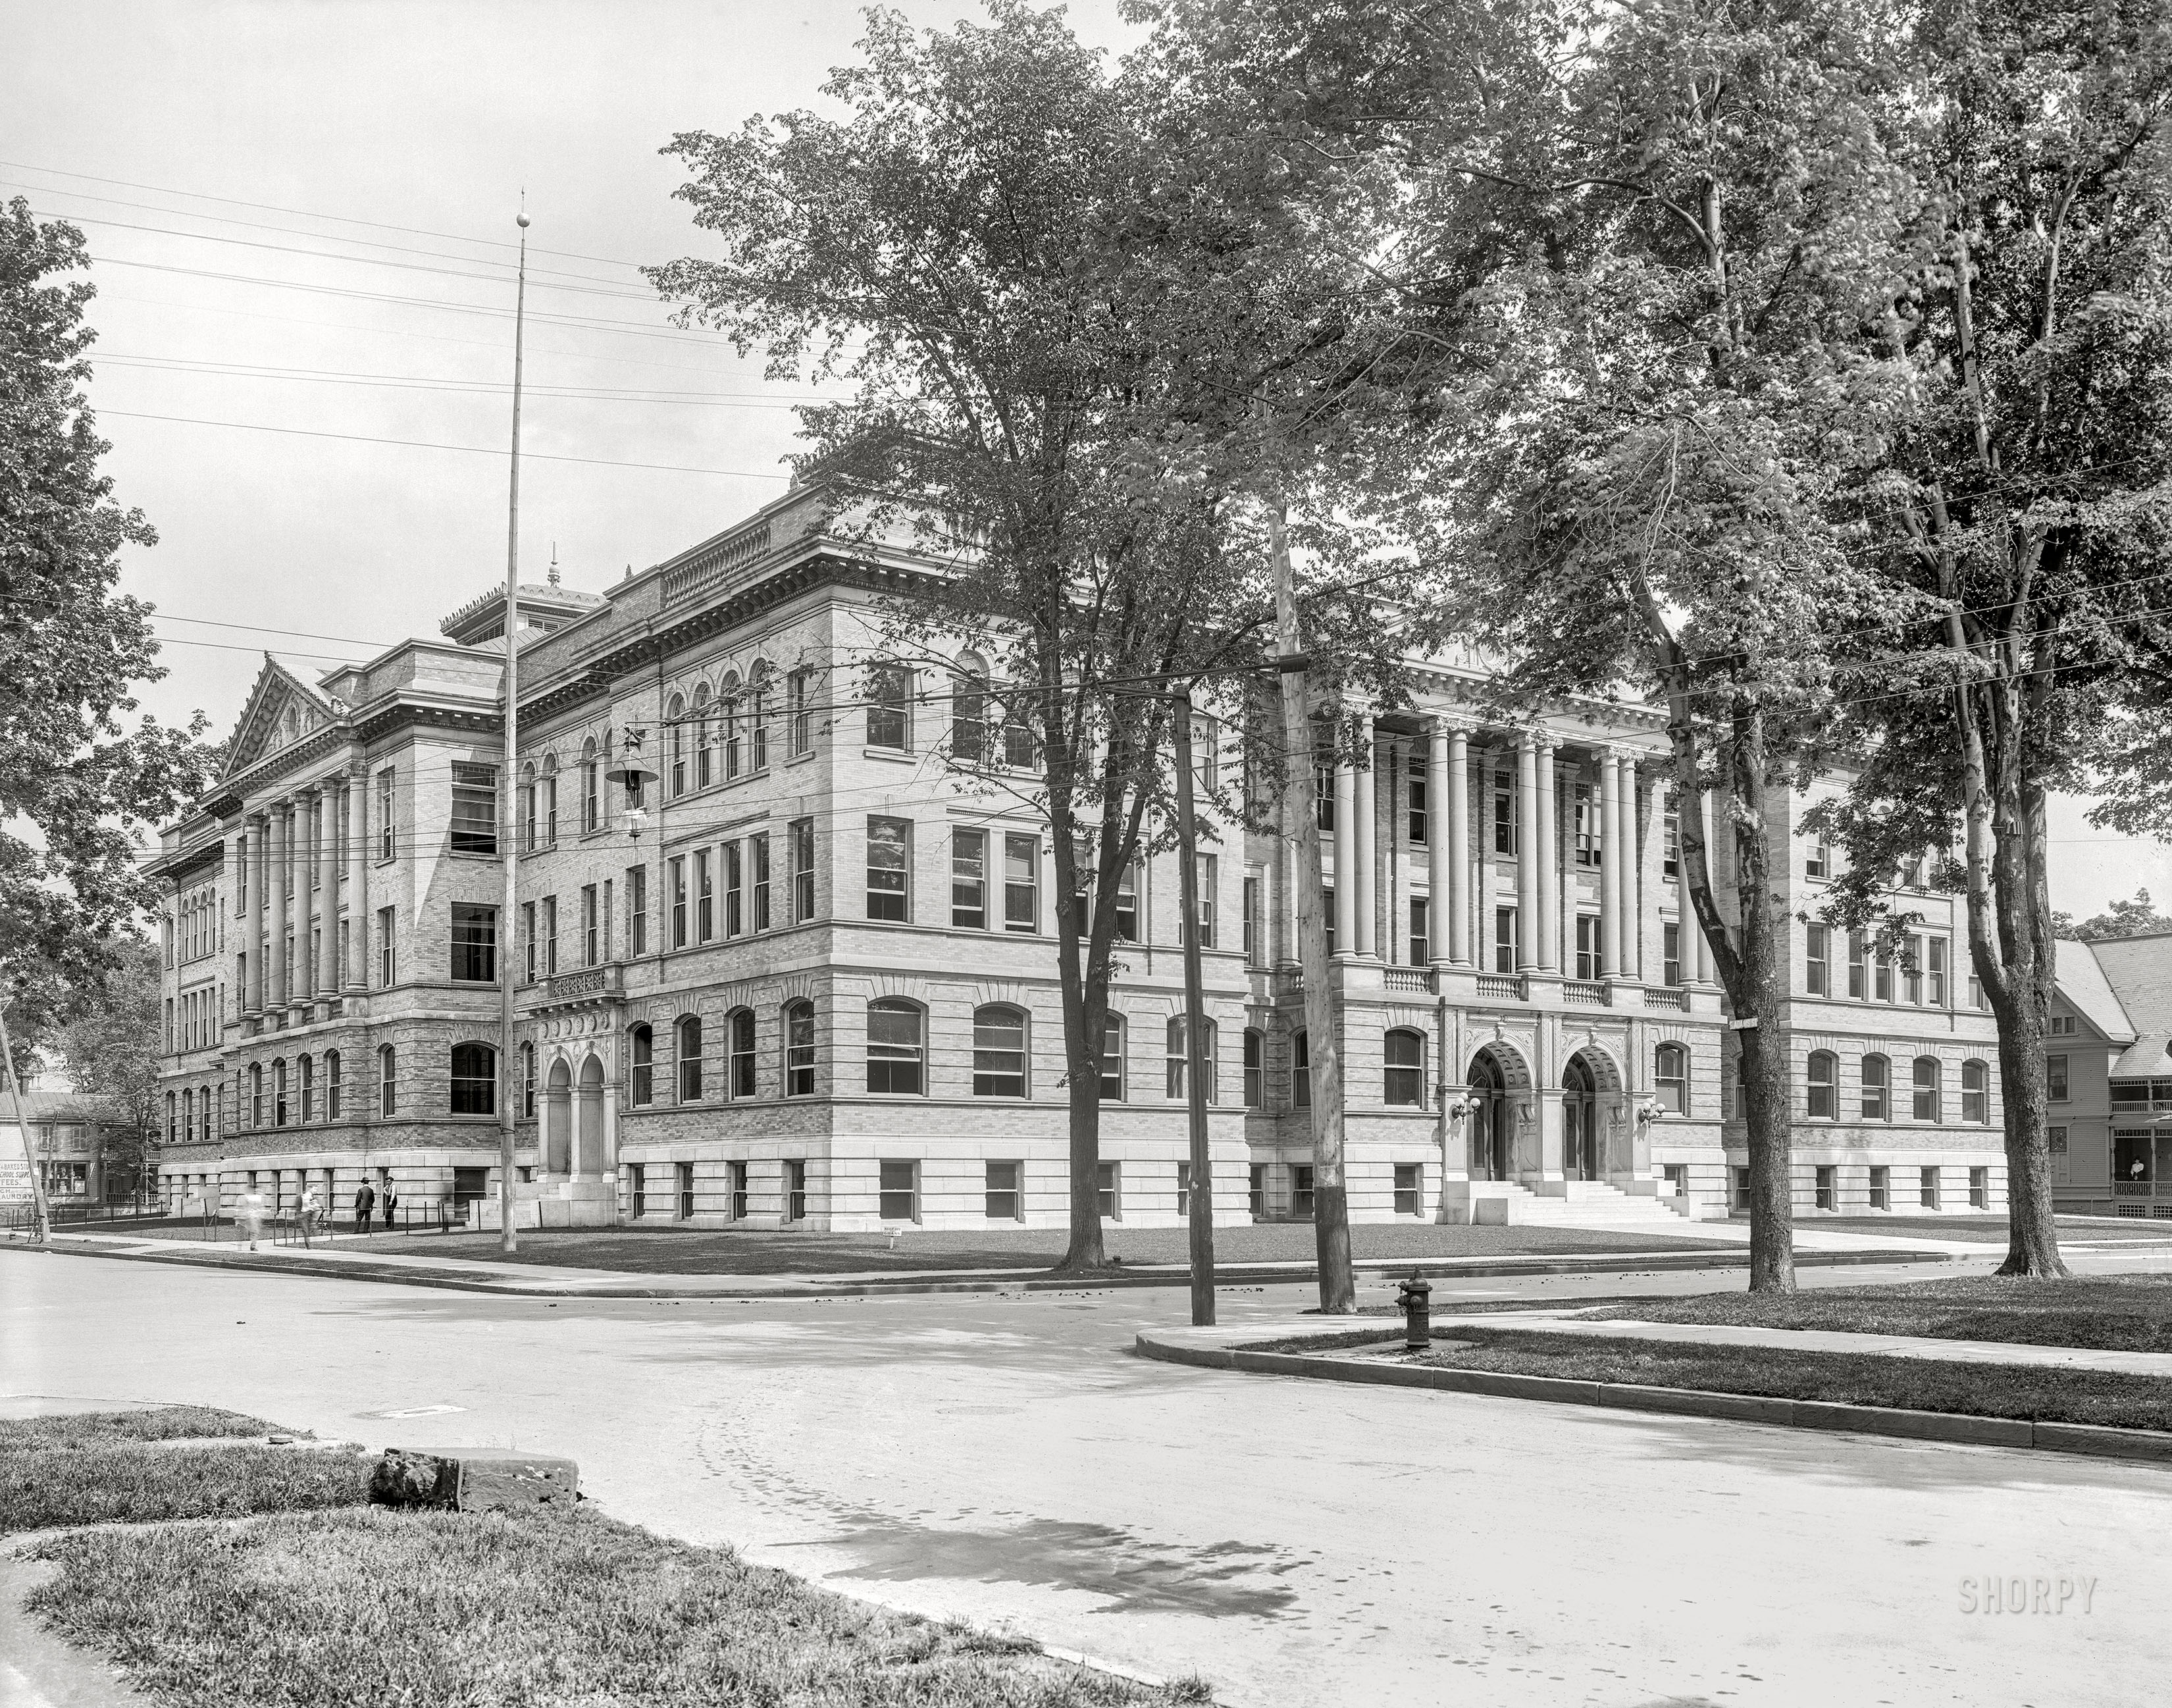 Syracuse, New York, 1904. "Central Technical High School, Warren and Adams streets." 8x10 inch dry plate glass negative, Detroit Photographic Company. View full size.